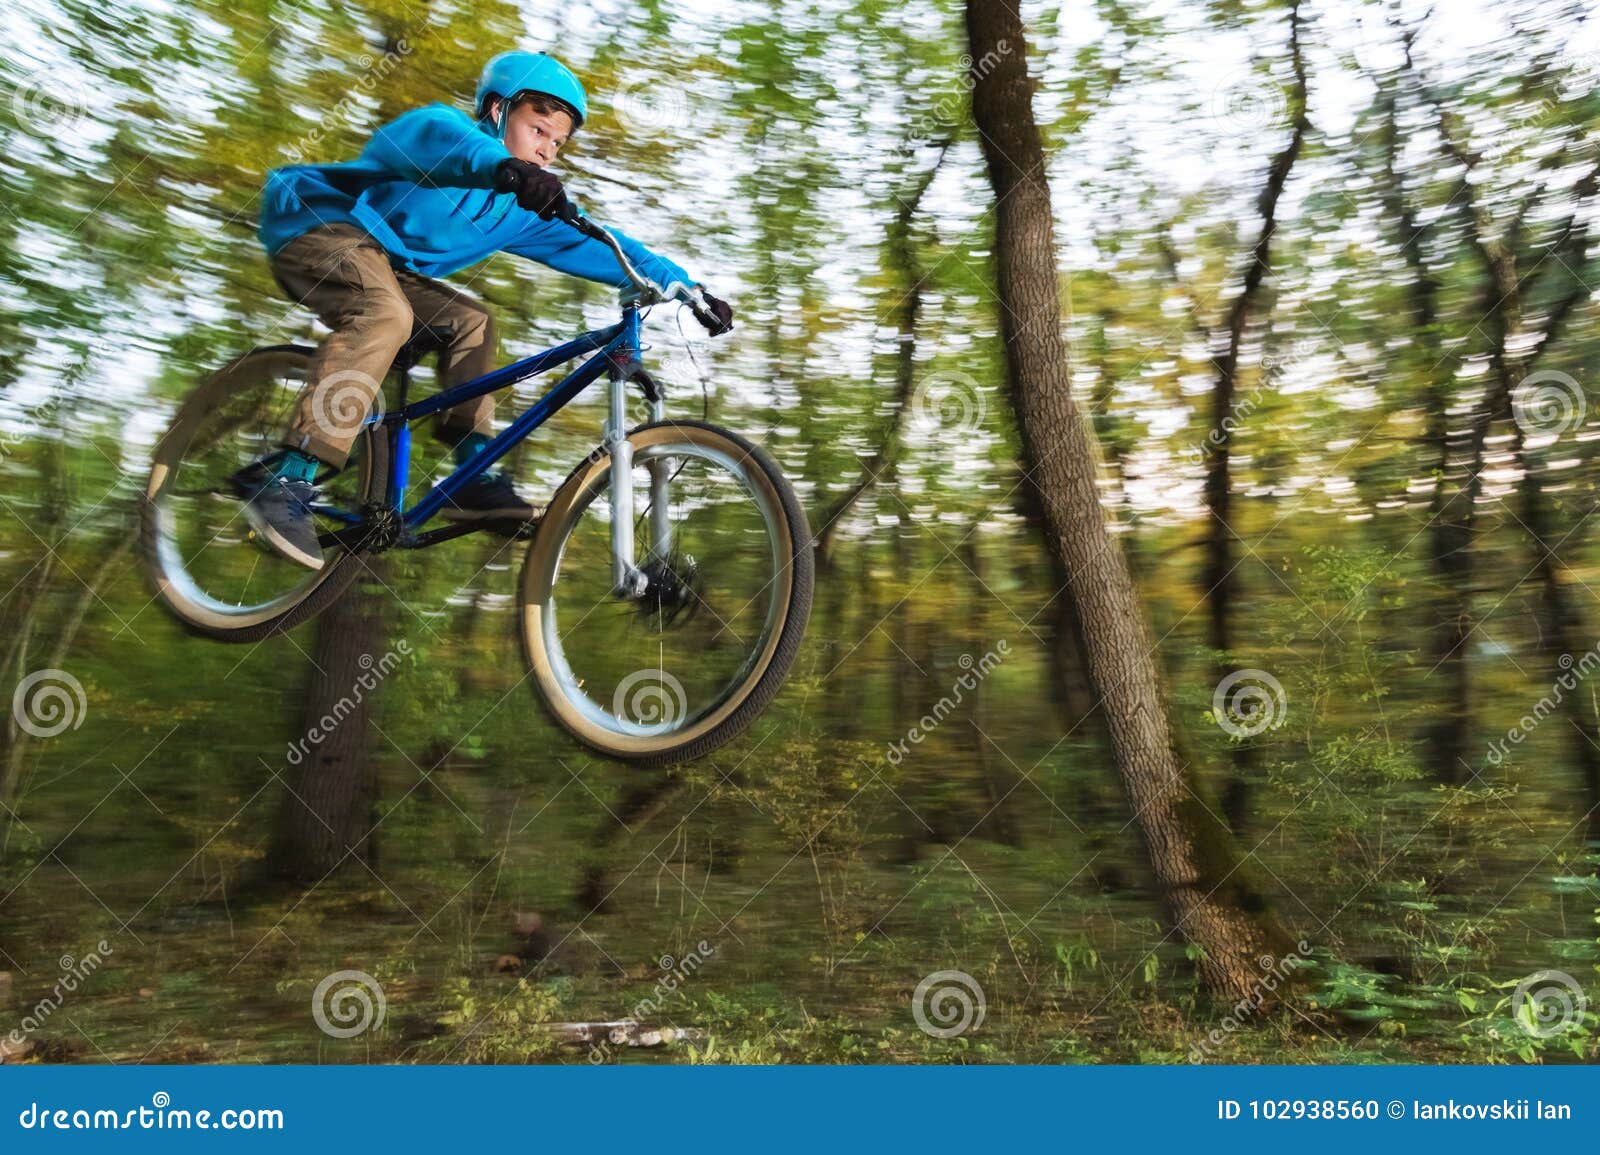 A Young Guy in a Helmet Flies Landed on a Bicycle after Jumping from a ...